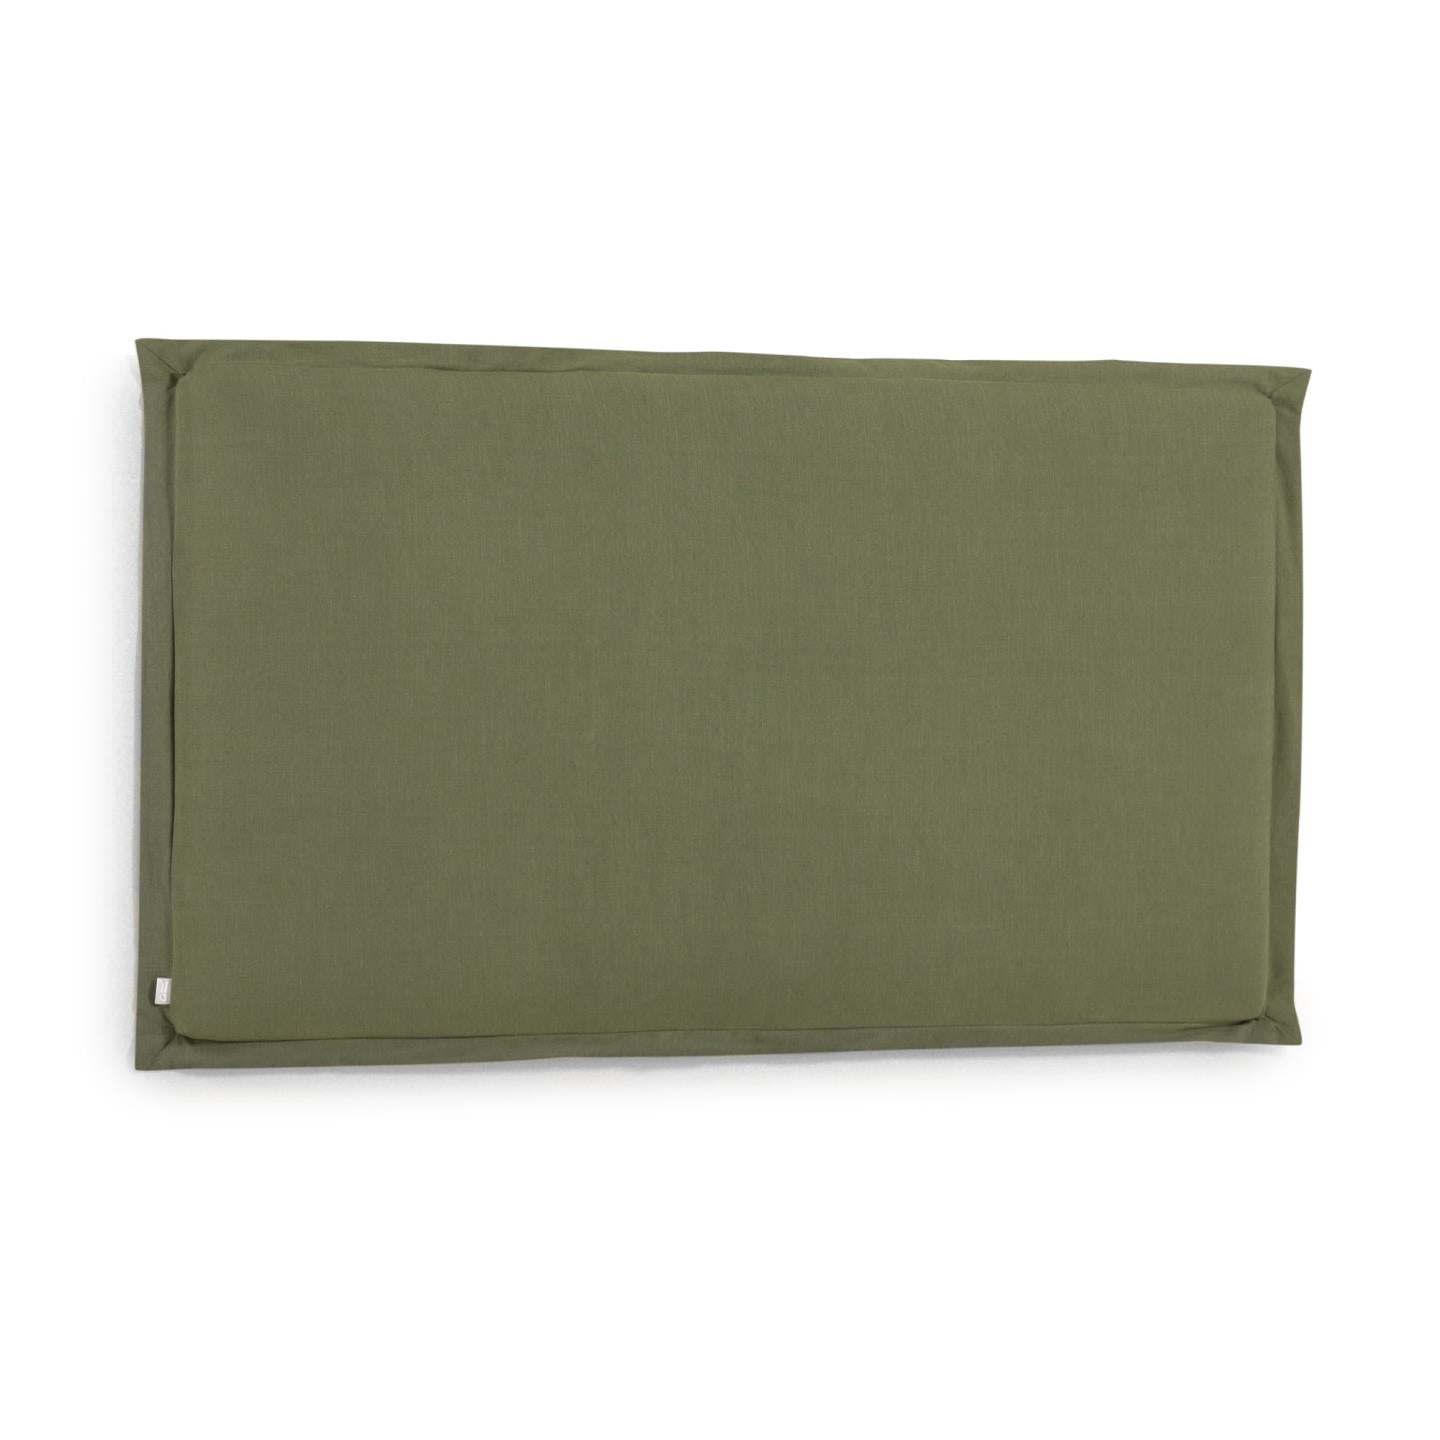 Tanit headboard with green linen removable cover, for 200 cm beds